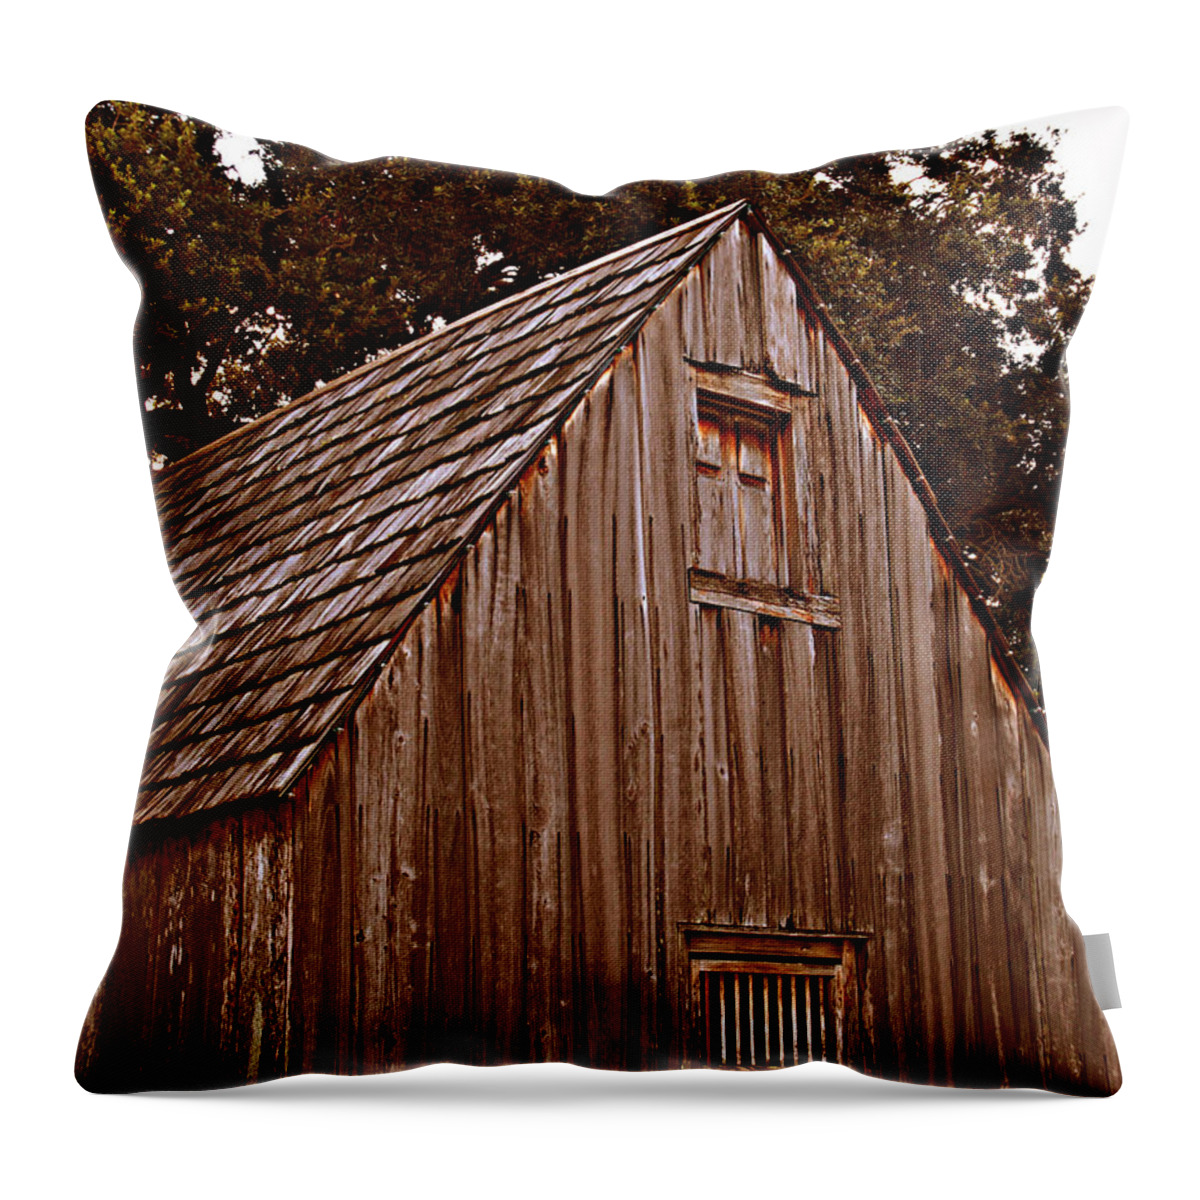 Florida Throw Pillow featuring the photograph This Old House by Bob Johnson